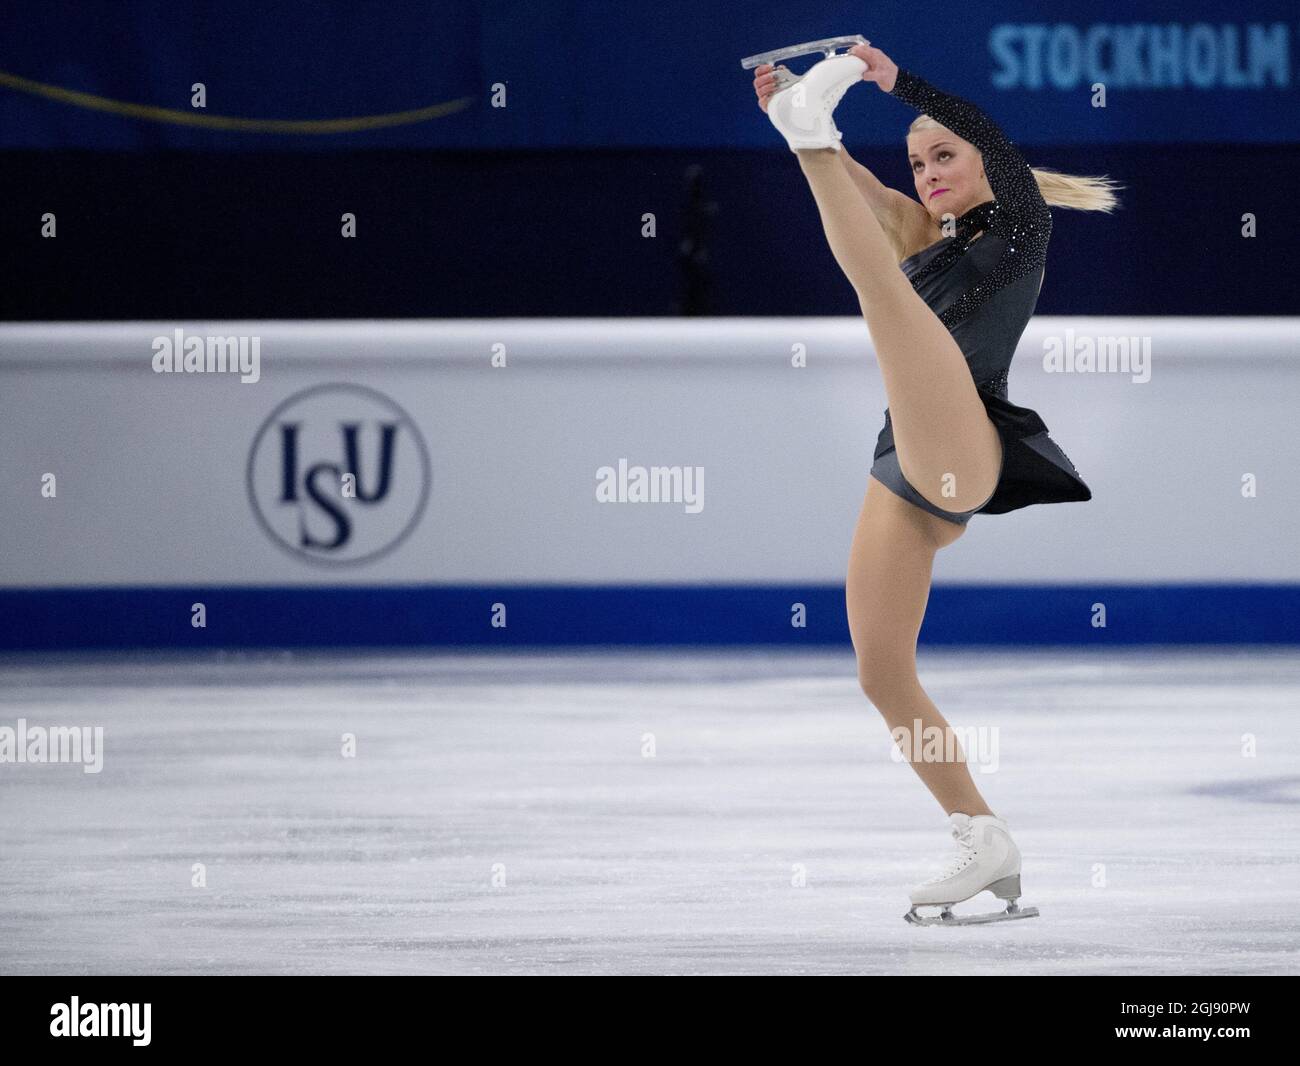 STOCKHOLM 20150129 Kiira Korpi of Germany is seen during the ladyÂ´s short program at the European Figure Skating Championships in Stockholm, Sweden, January 29, 2014. Foto: Jessica Gow / TT / Kod 10070 Stock Photo